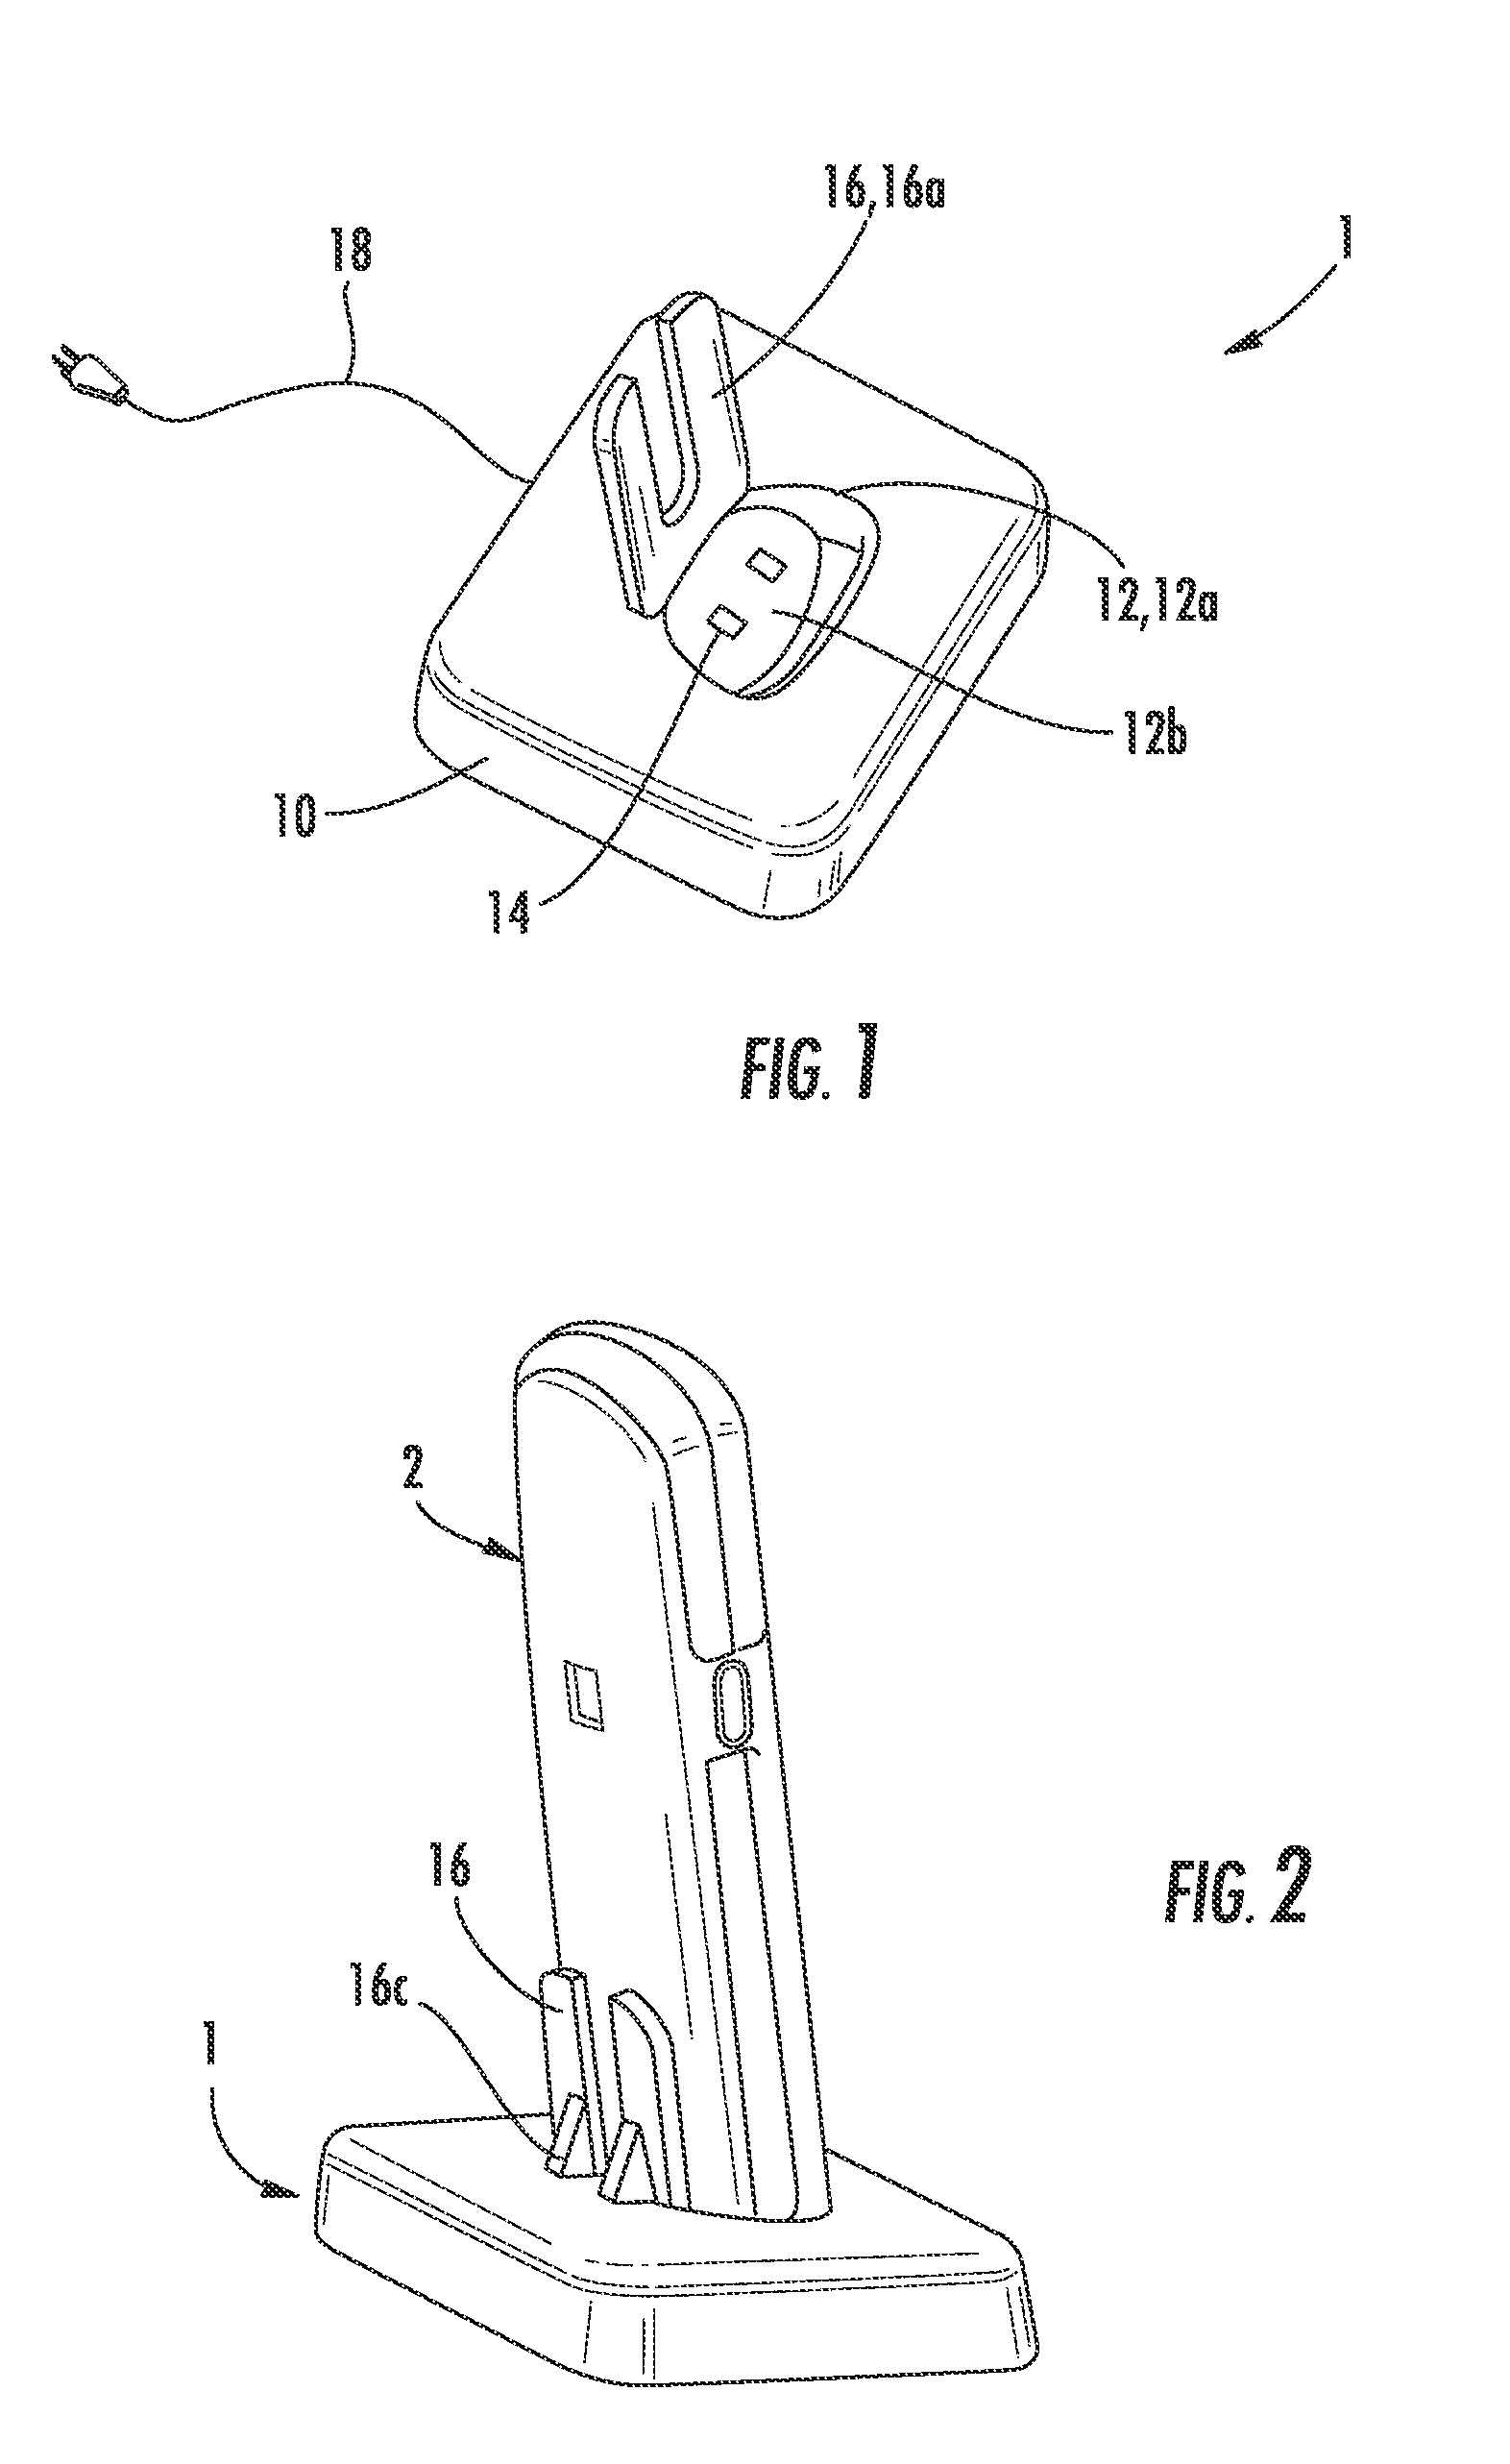 Docking Station And Device Adapter For Use In A Docking Station